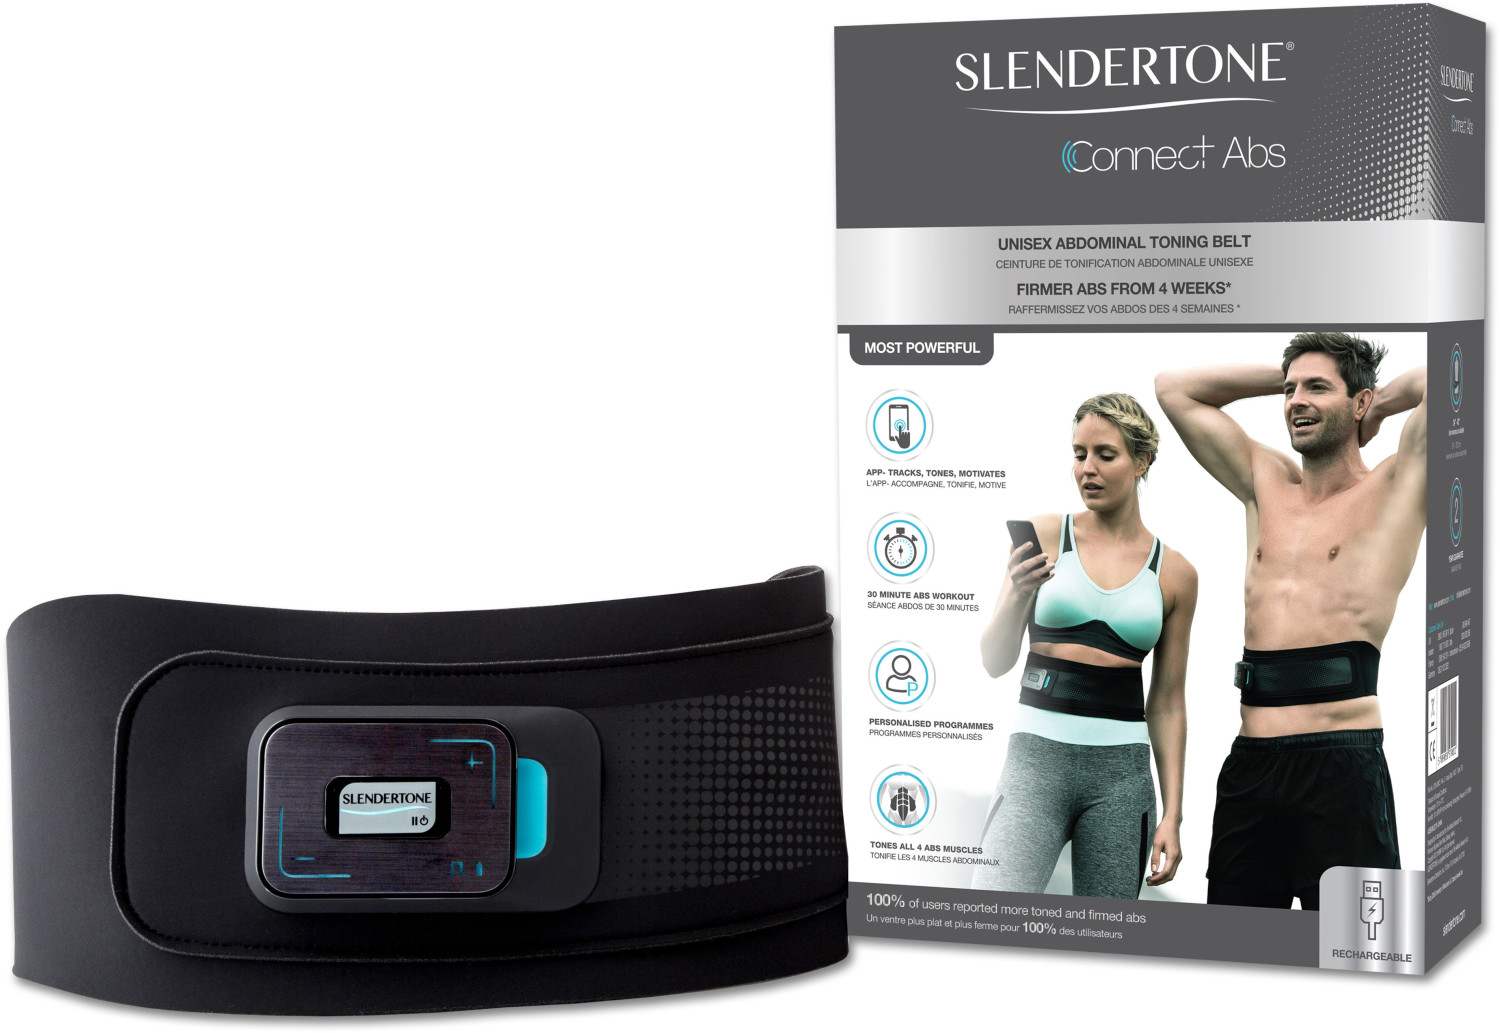 Having failed to secure a new investor, Slendertone has collapsed